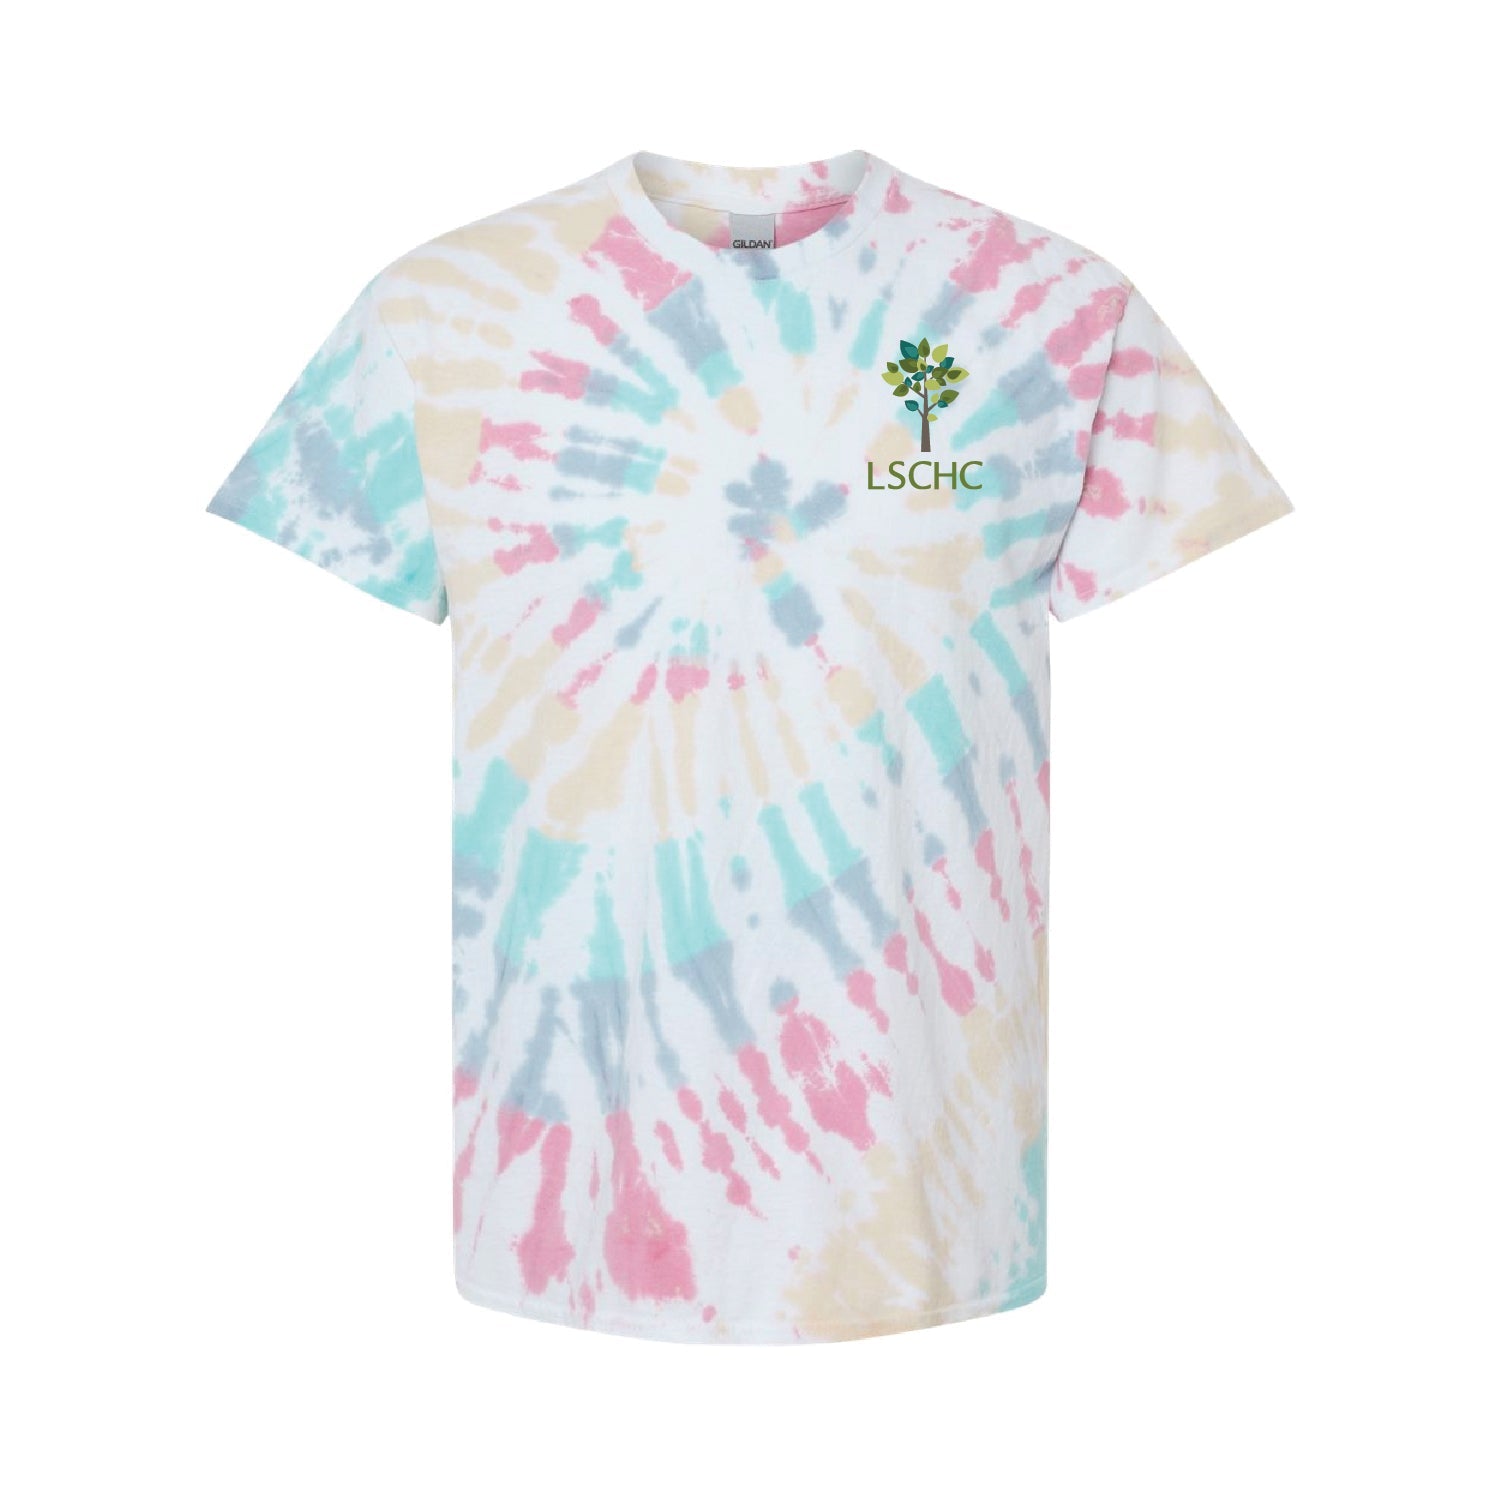 LSCHC Multi-Color Spiral Tie-Dyed T-Shirt - DSP On Demand